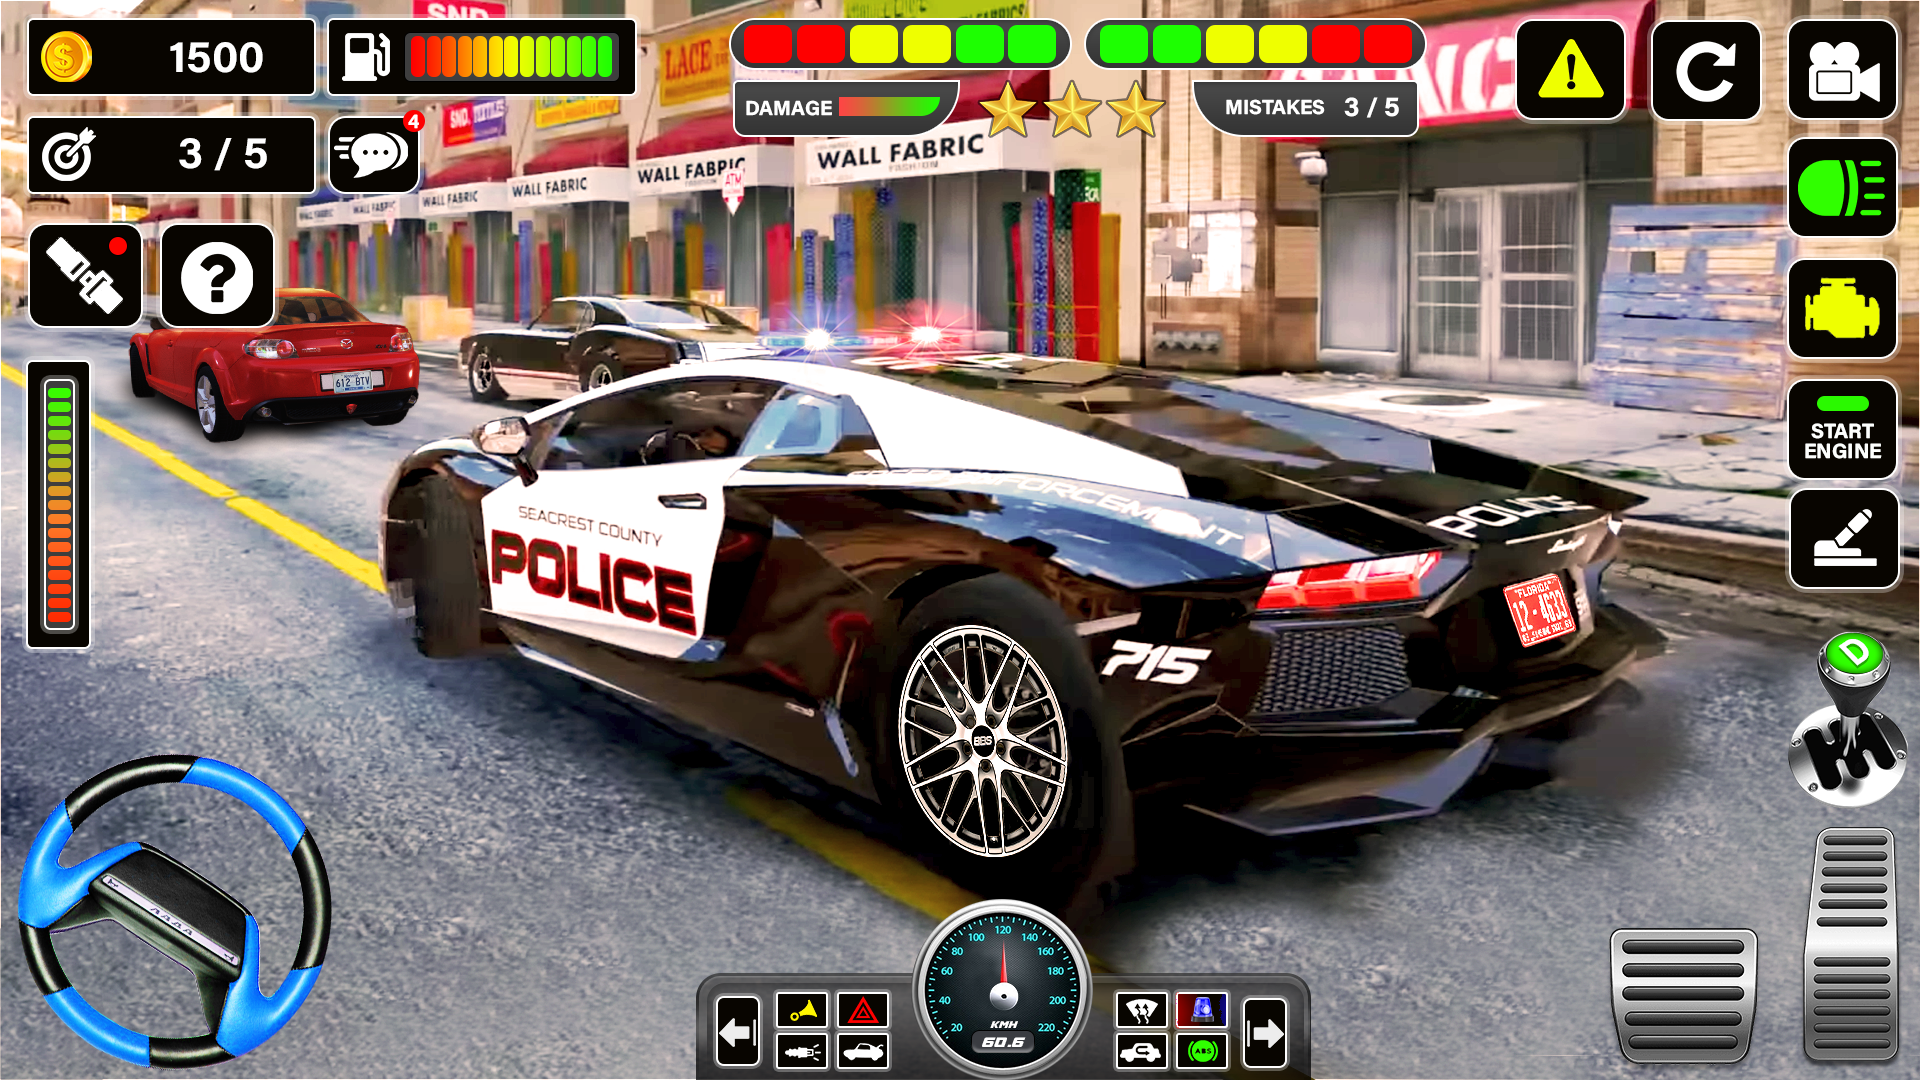 Screenshot of Police Car Thief Chase Game